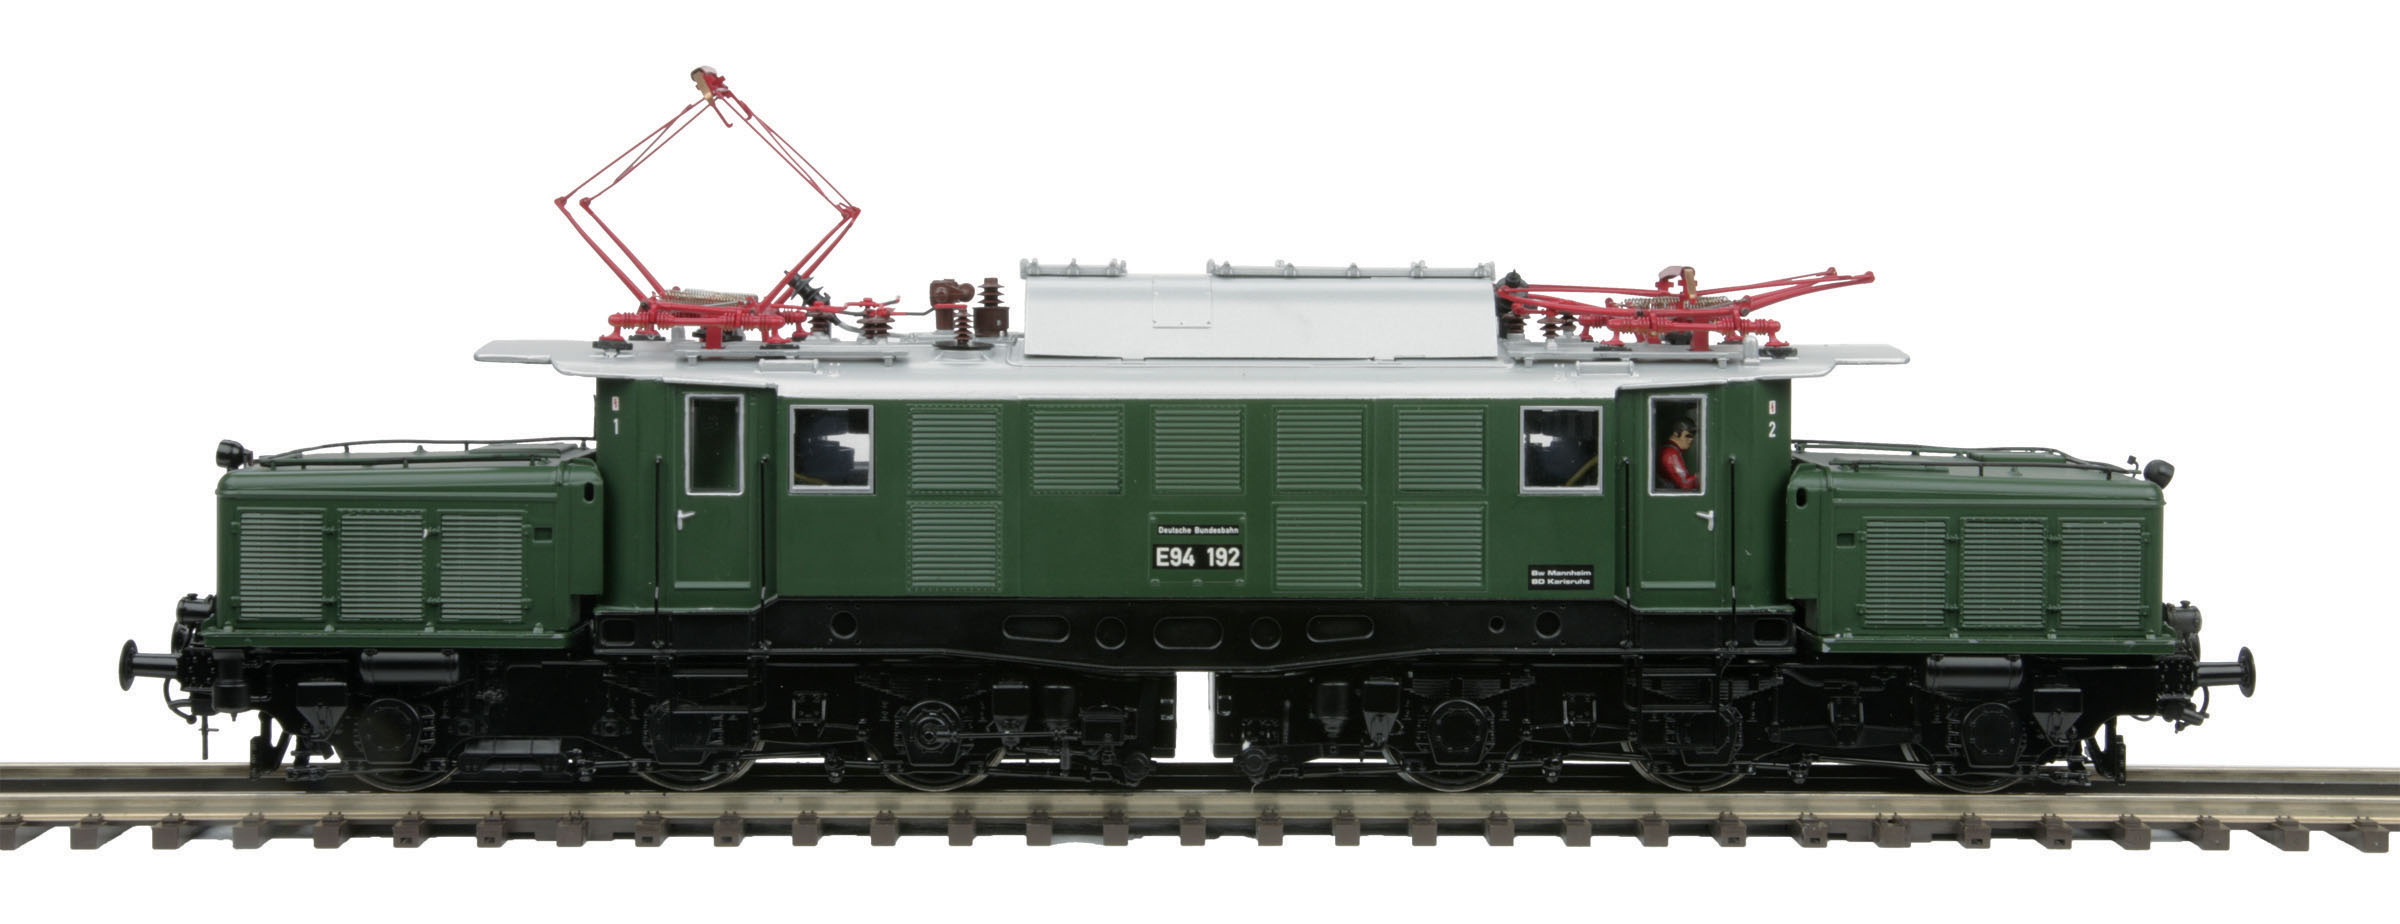 MTH Electric Trains Shipping, Through March 2015 O Gauge Railroading 